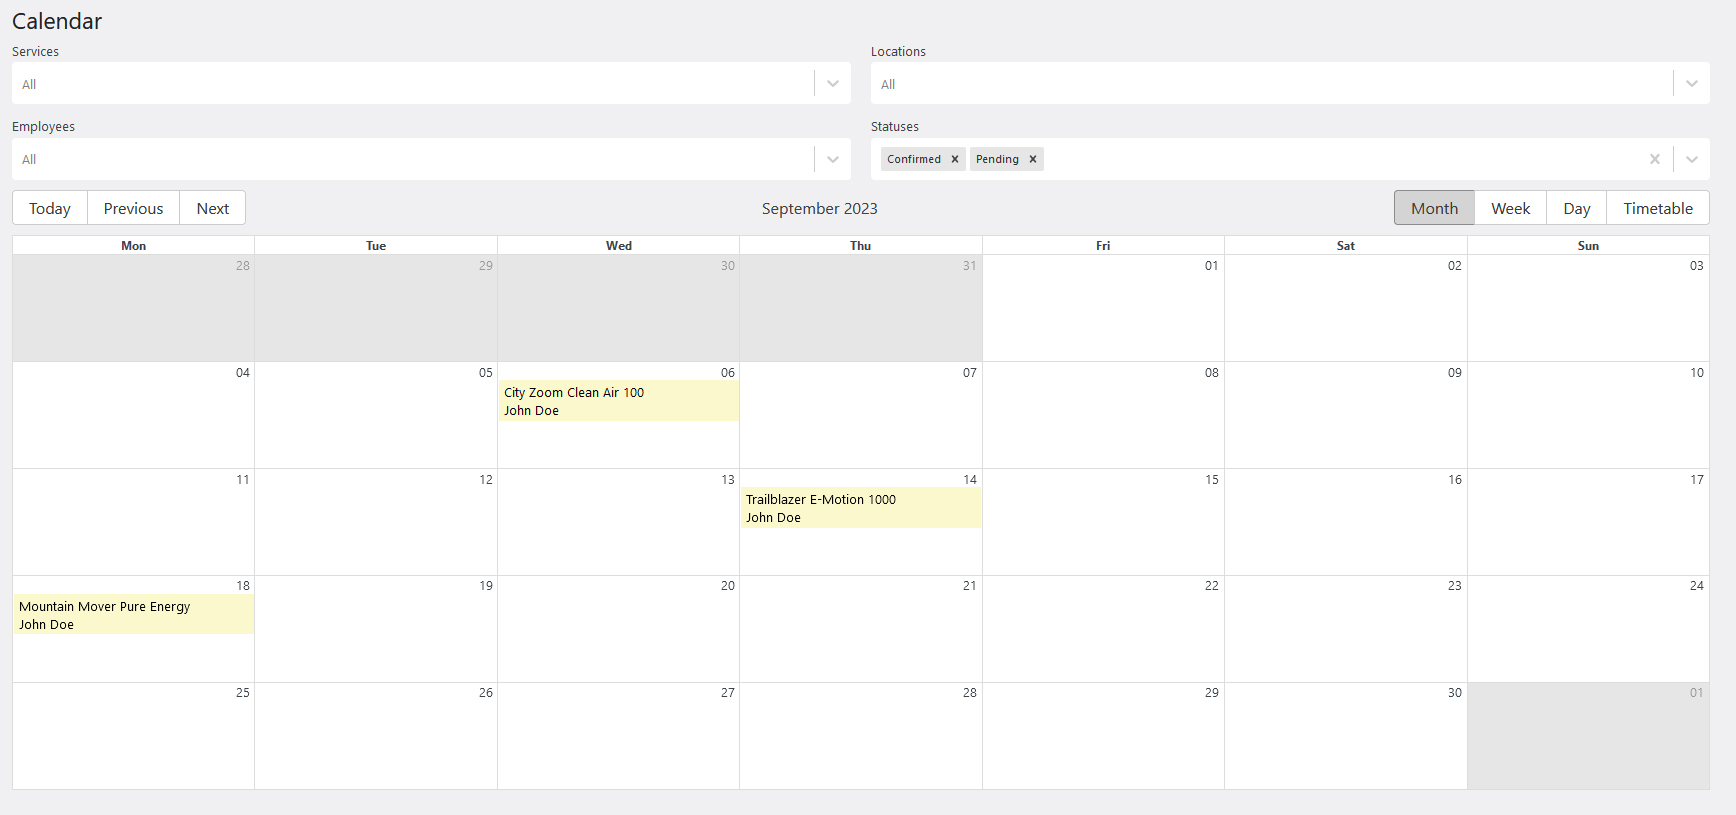 Depiction of the calendar with diverse dates, services, and employees accessible through the WordPress dashboard.